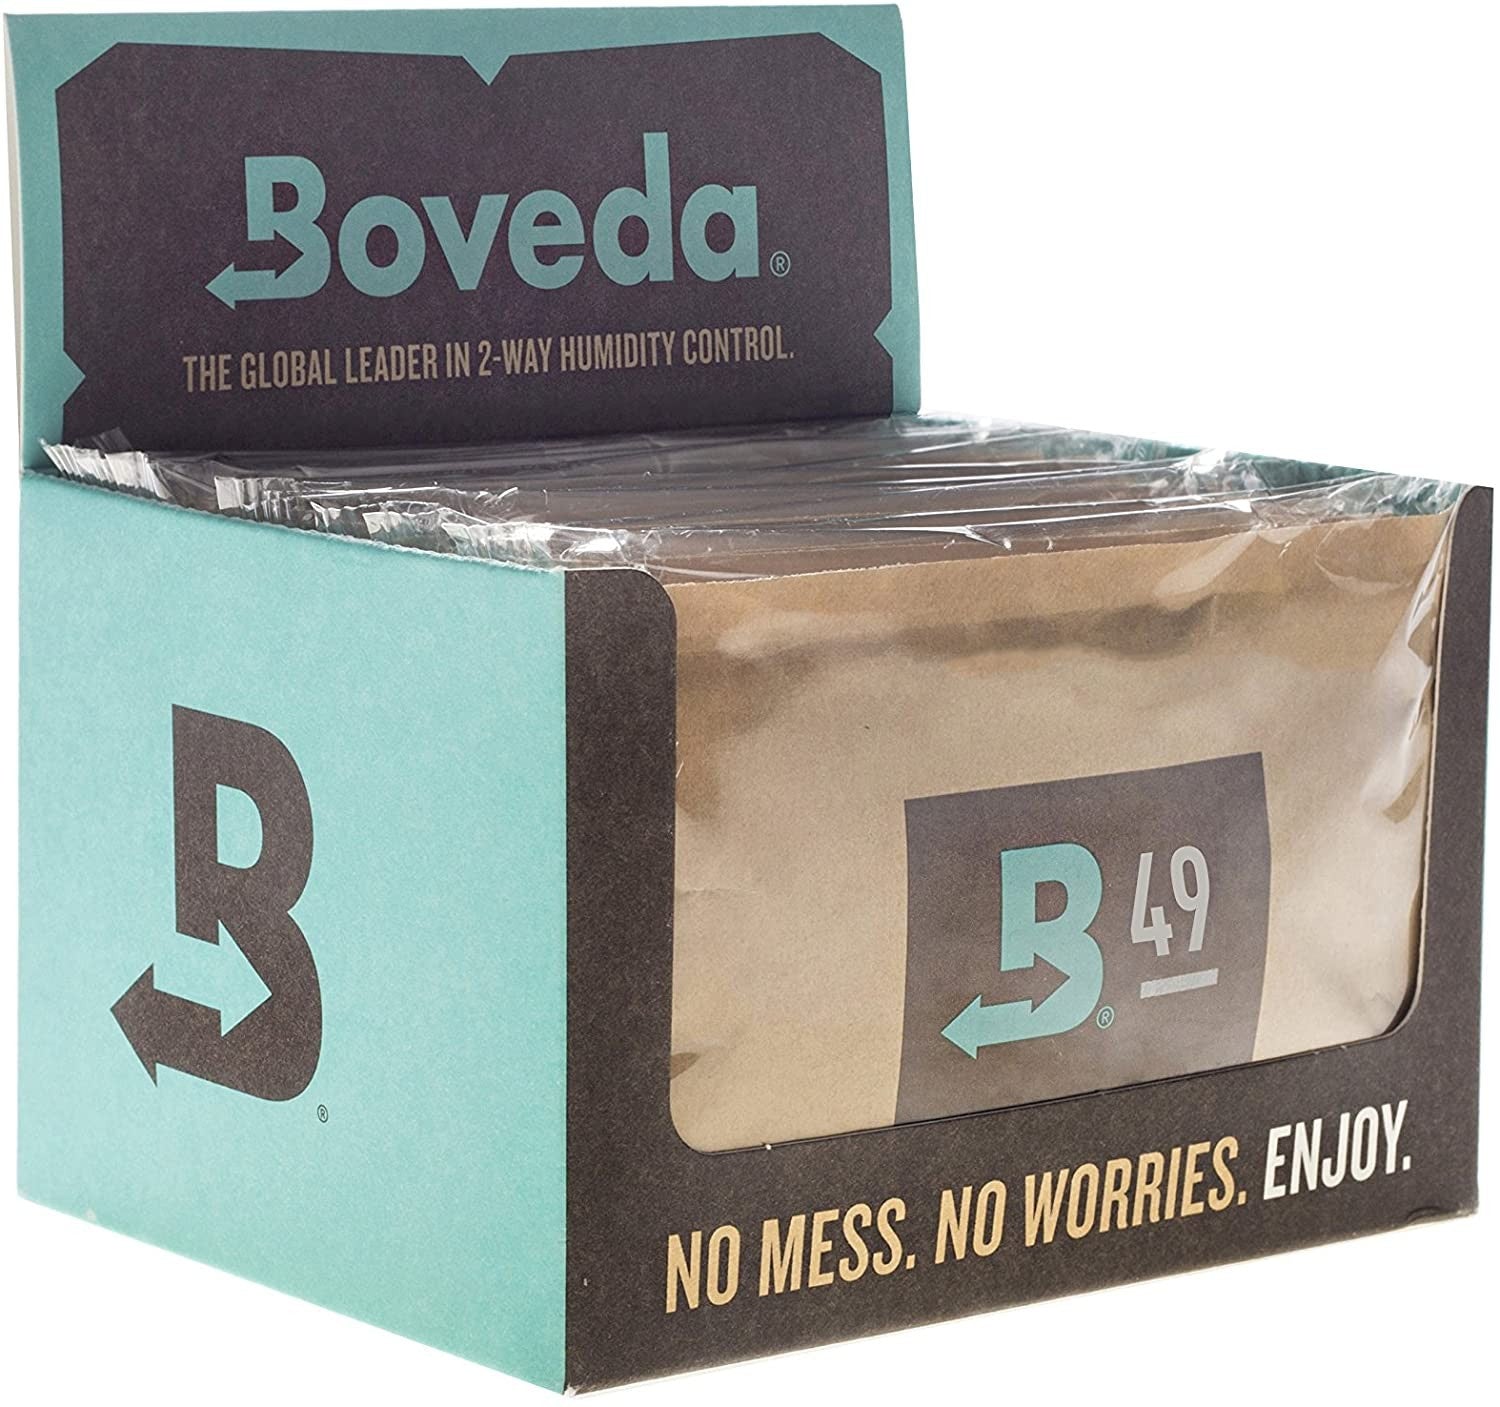 Boveda 2-way Humidification System for Stringed Instruments